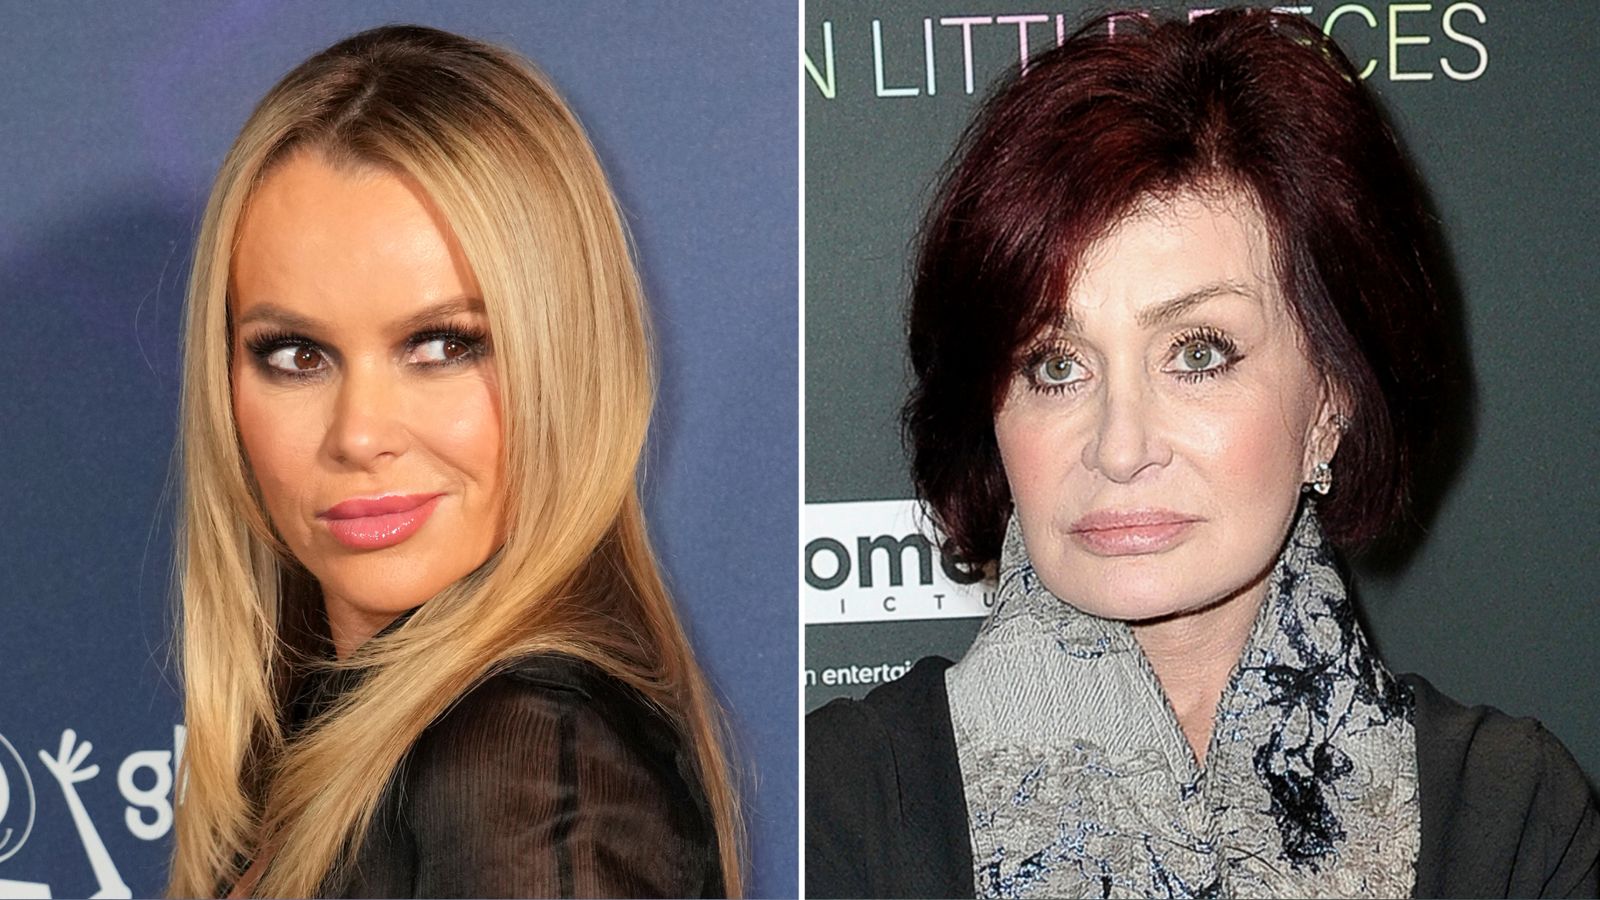 'It's demeaning': Sharon Osbourne hits back at Amanda Holden in row over Simon Cowell